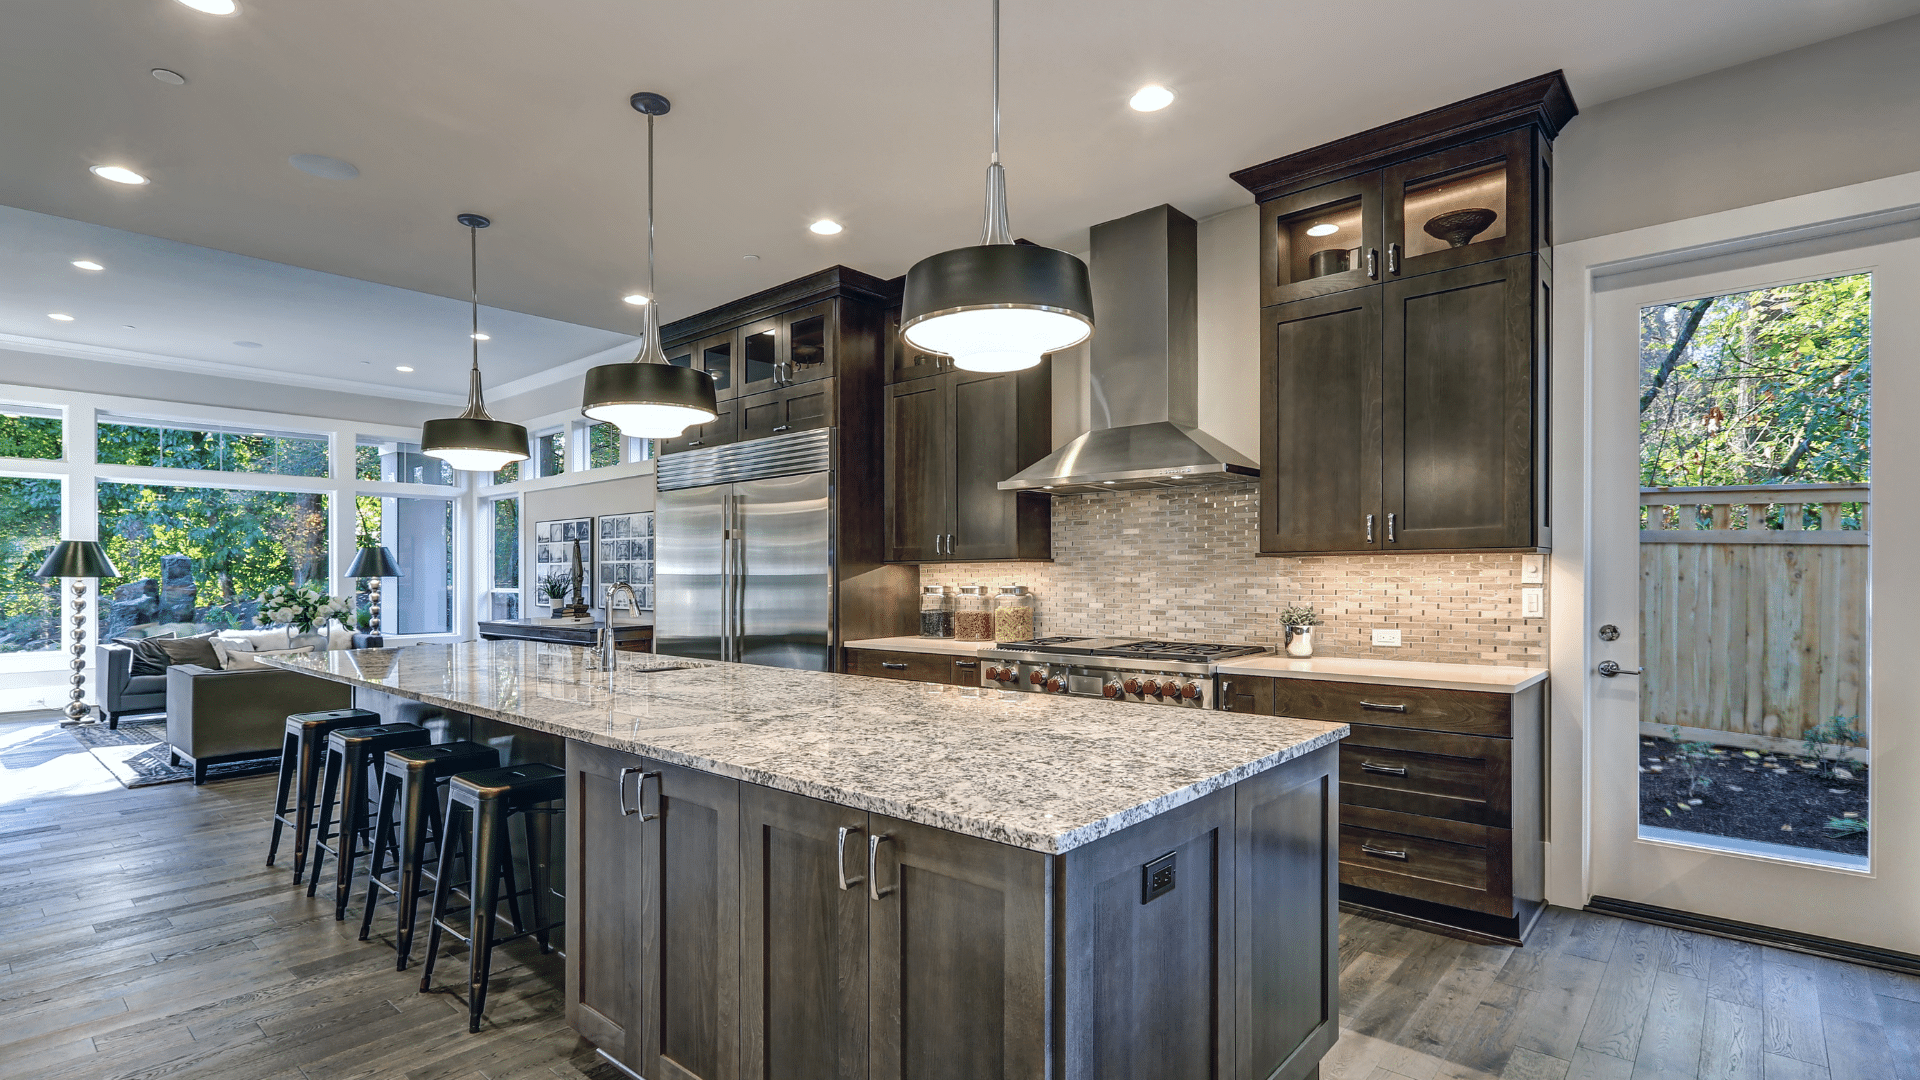 L-Shaped Kitchen Designs To Consider For Your Next Remodel